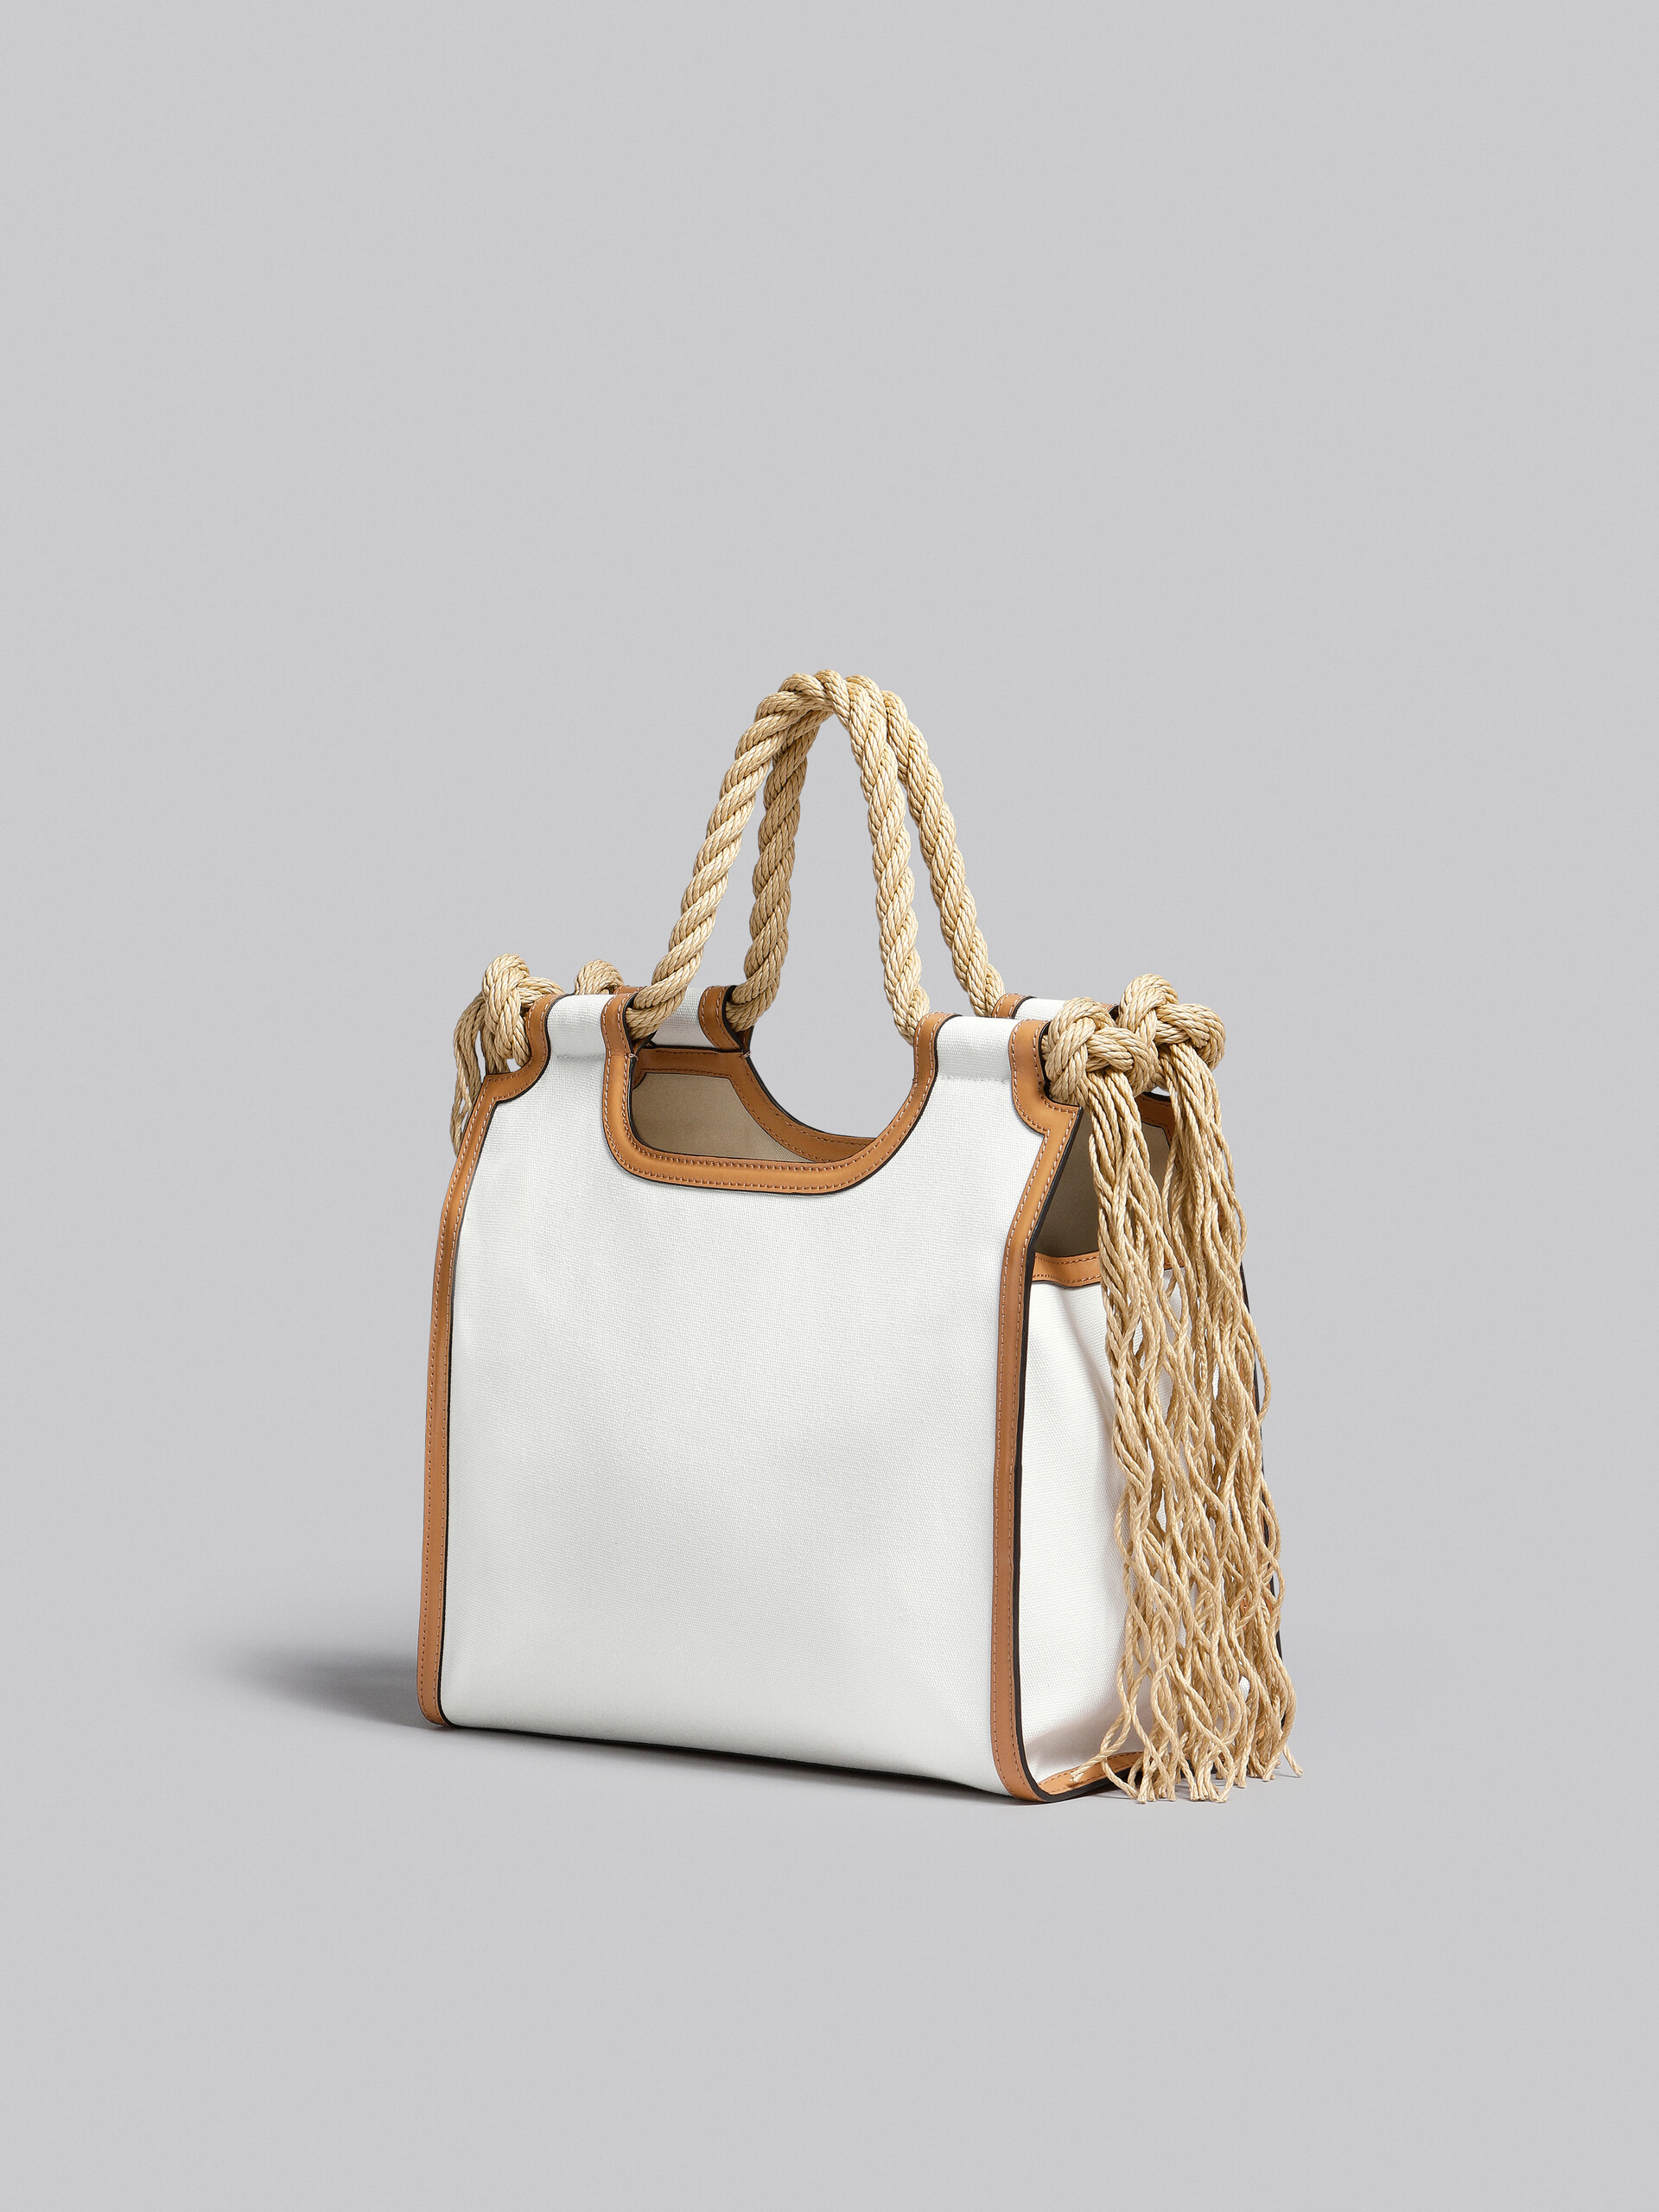 Marni x No Vacancy Inn - Marcel Tote Bag in white canvas with beige trims - Handbag - Image 3